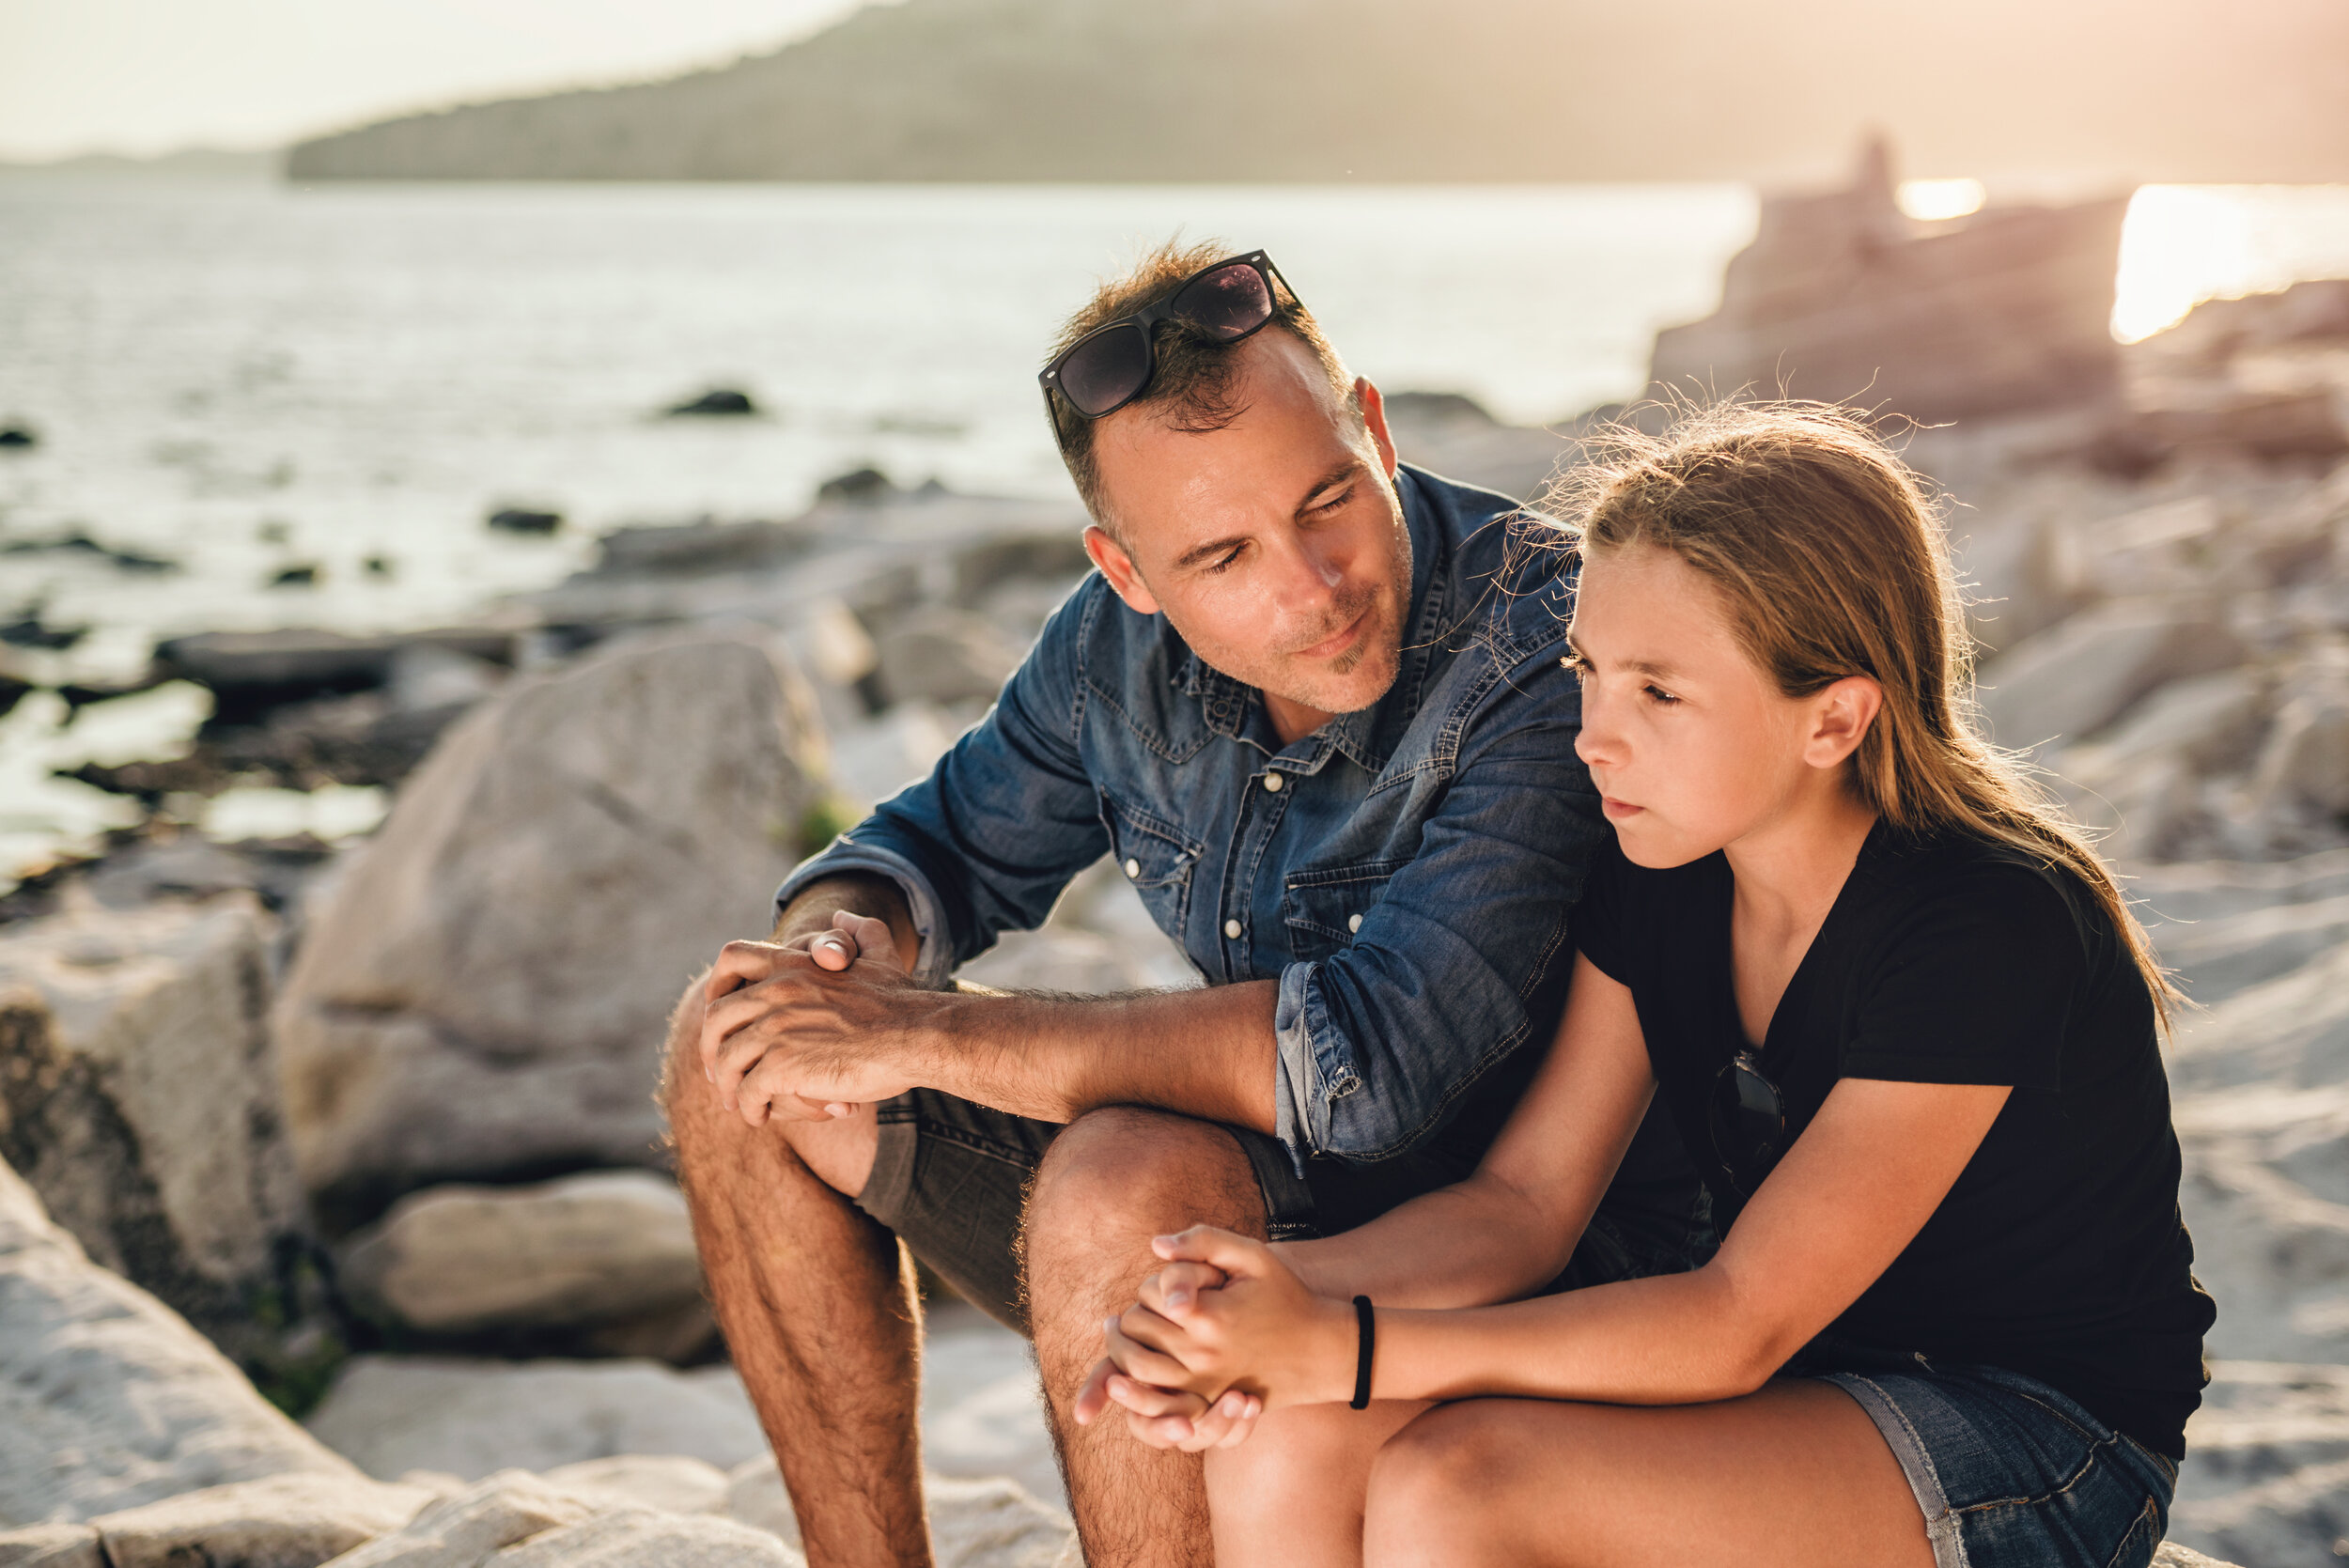 Father and daughter relaxing on a rocky beach by the sea and having time together.